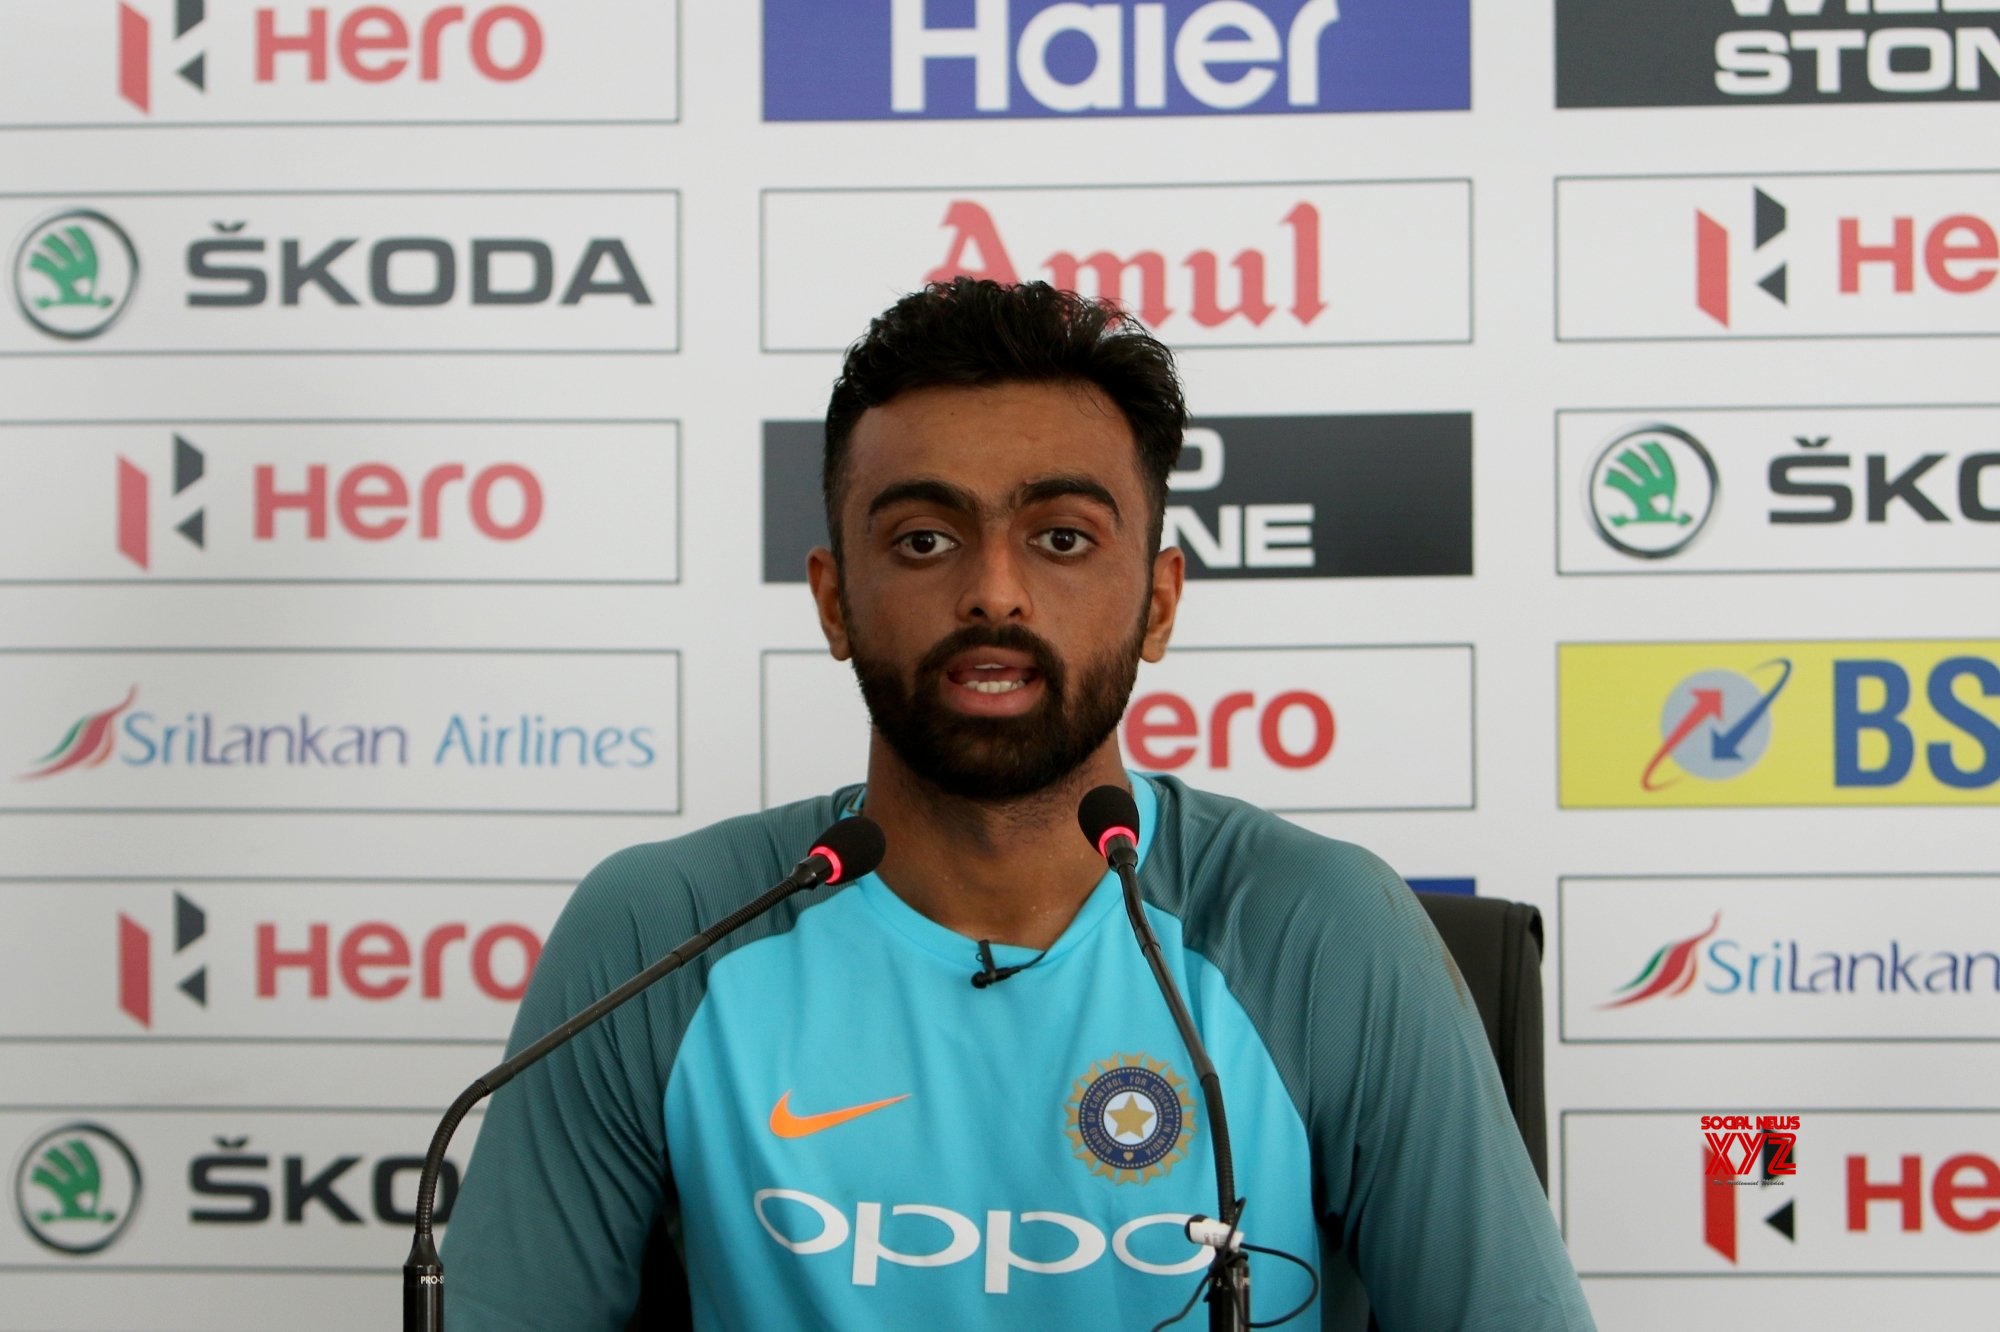 Unadkat expresses disappointment over exclusion from England tour